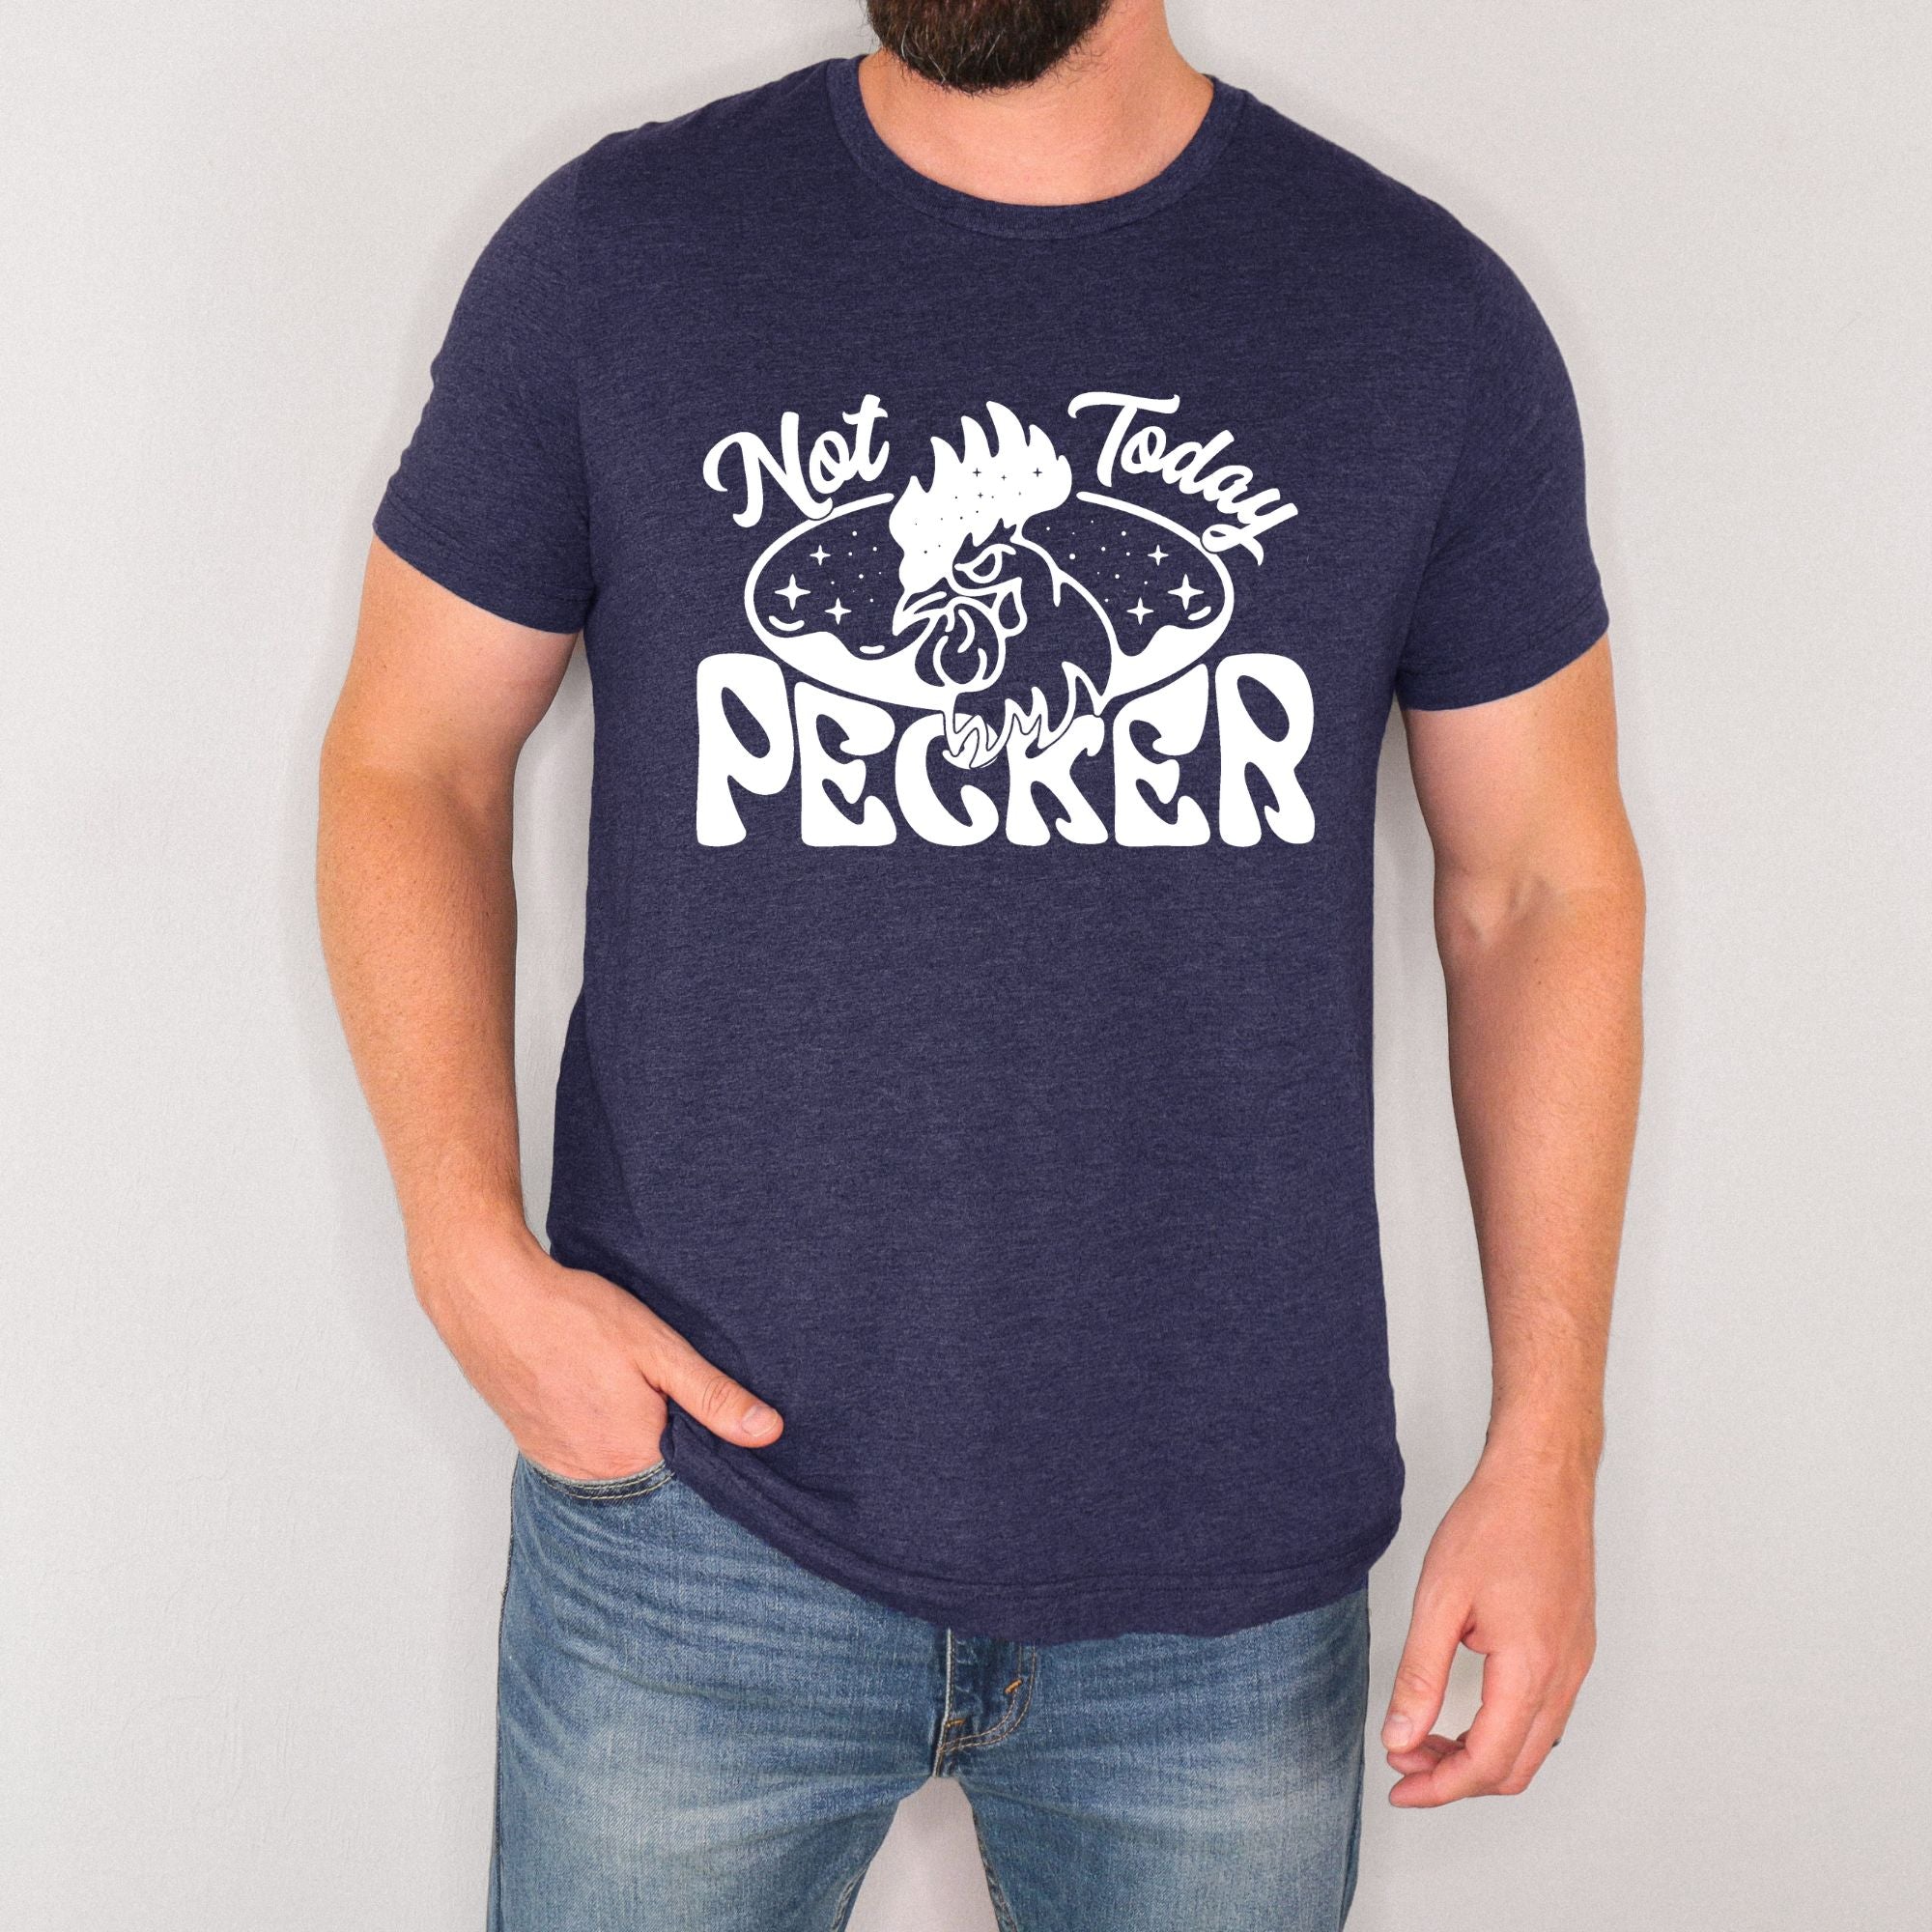 Not Today Pecker Hilarious Chicken Graphic Tee *UNISEX FIT*-Graphic Tees-208 Tees Wholesale, Idaho